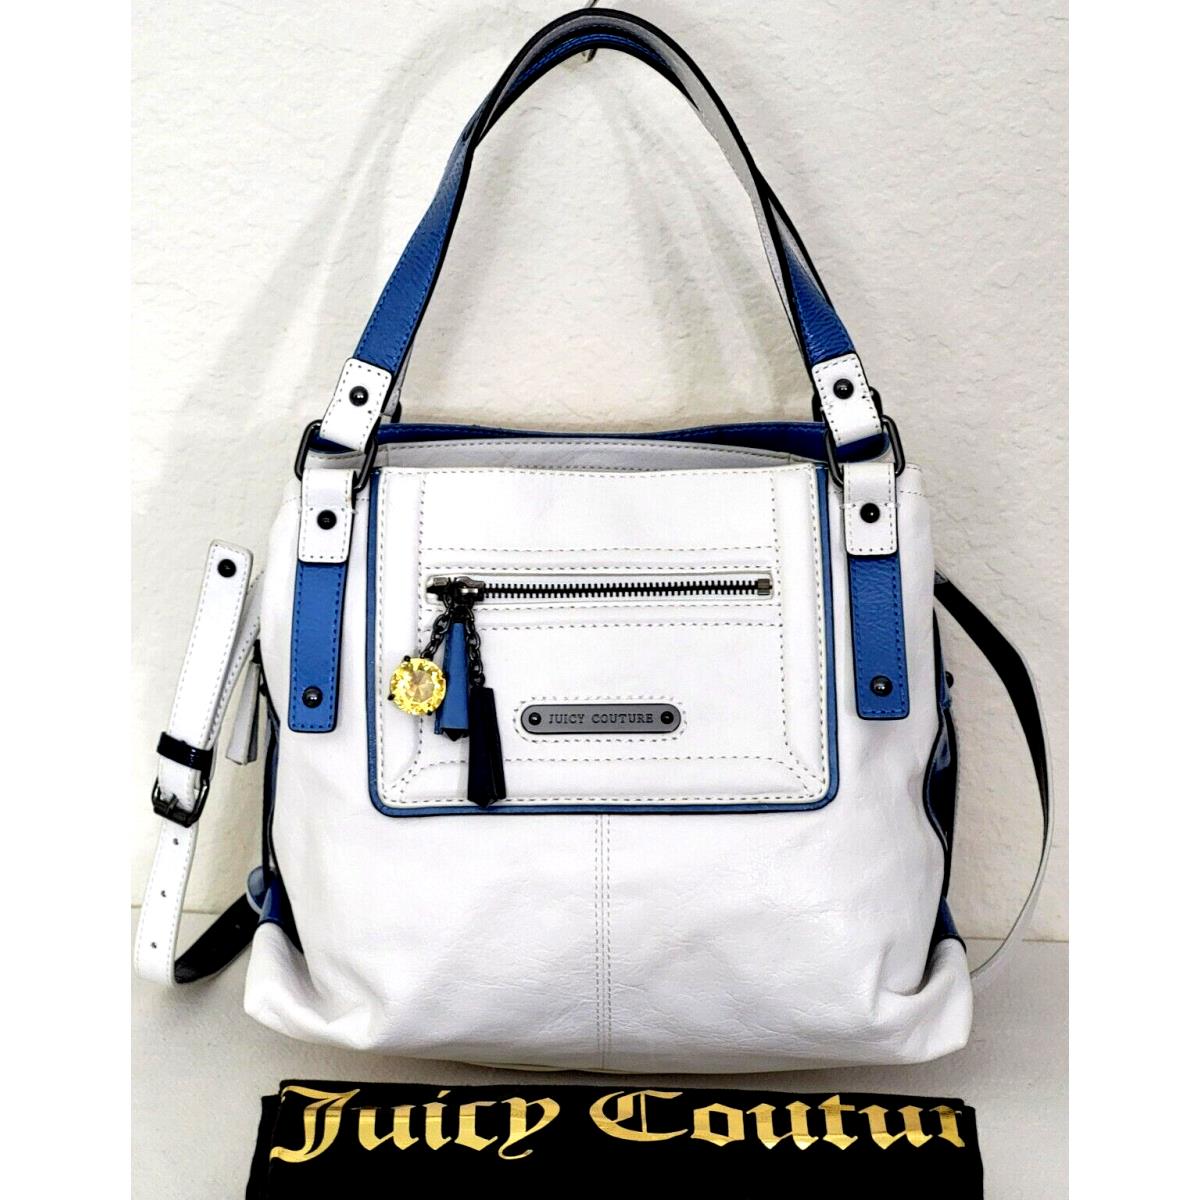 Juicy Couture | Bags | Royal Blue Juicy Couture Purse | Poshmark